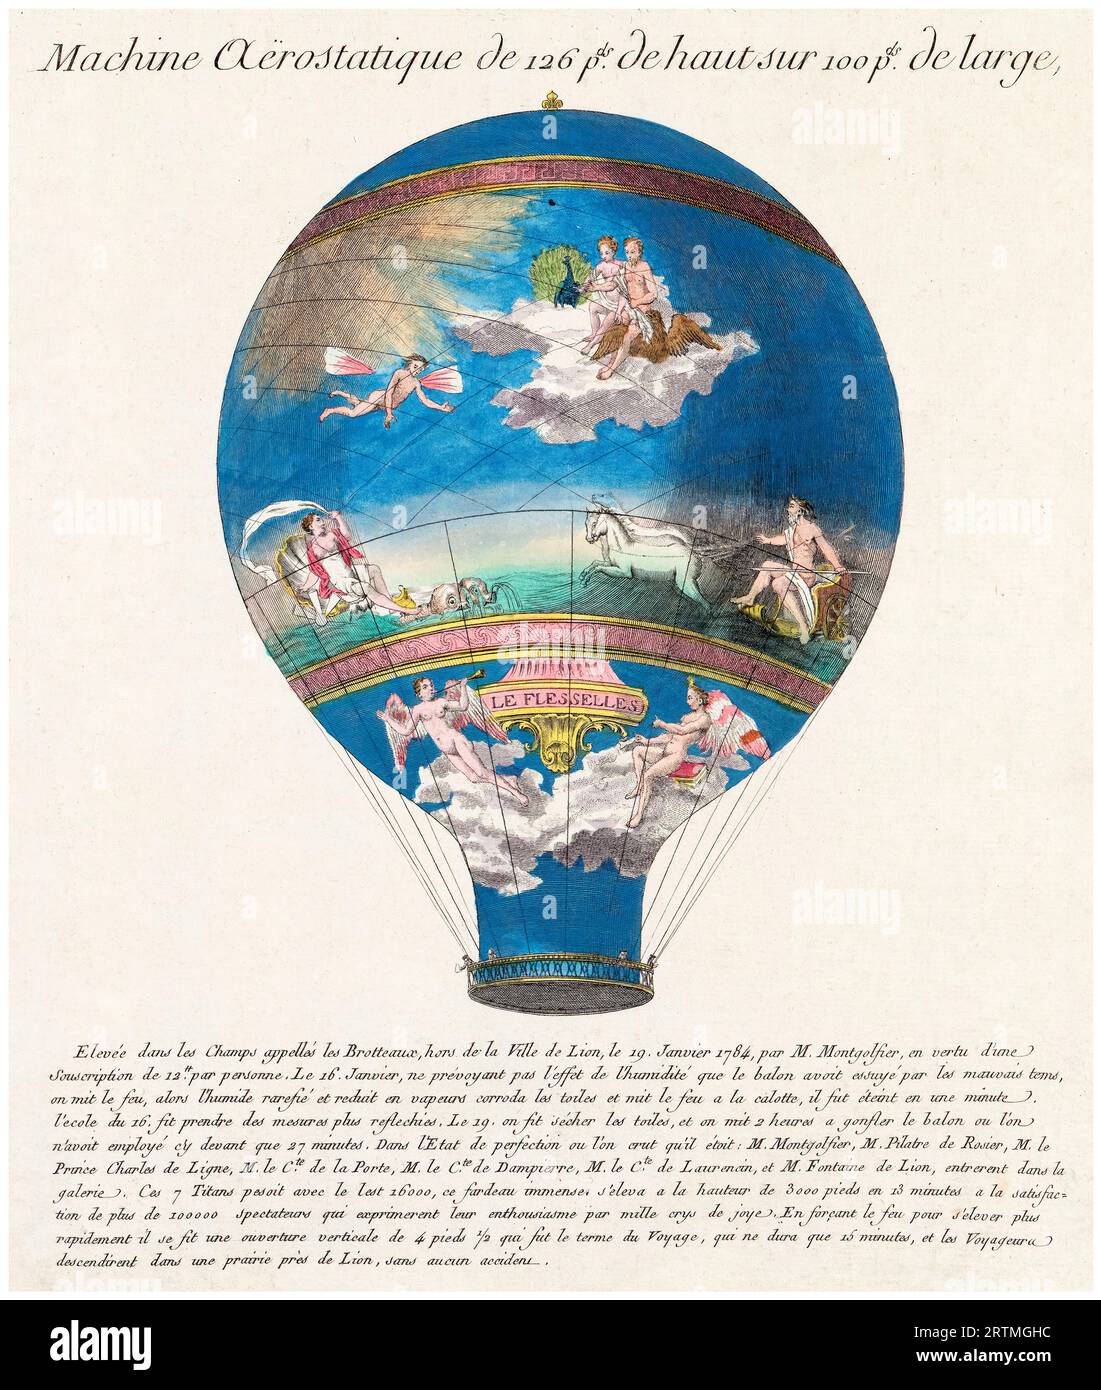 The huge Montgolfier hot-air balloon 'Le Flesselles', launched at Lyon, France on January 19th 1784, carrying seven passengers including Joseph Montgolfier and Jean François Pilâtre de Rozier, hand coloured engraving, 1784 Stock Photo